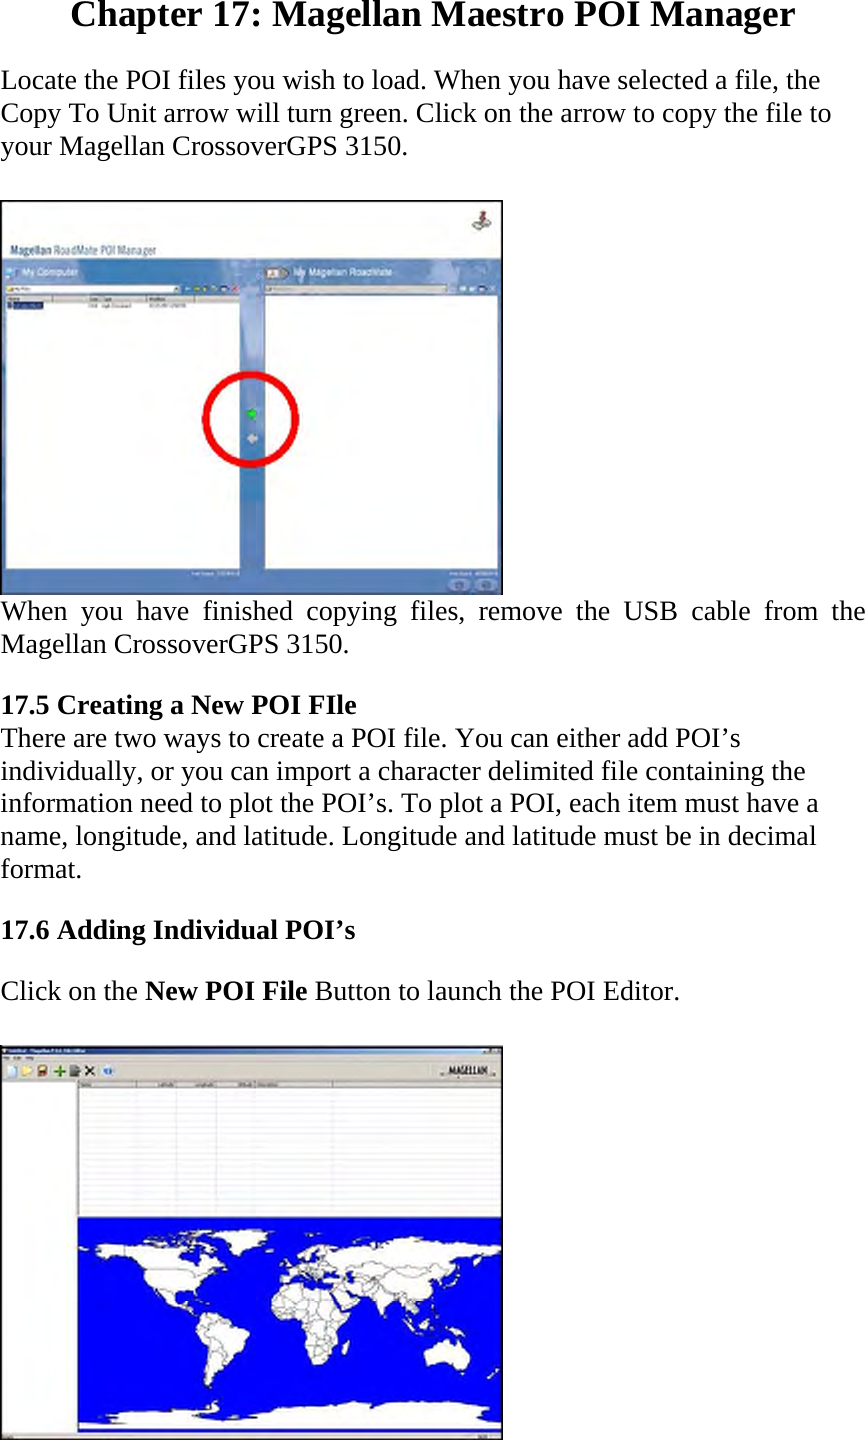 Chapter 17: Magellan Maestro POI Manager  Locate the POI files you wish to load. When you have selected a file, the Copy To Unit arrow will turn green. Click on the arrow to copy the file to your Magellan CrossoverGPS 3150.   When you have finished copying files, remove the USB cable from the Magellan CrossoverGPS 3150.  17.5 Creating a New POI FIle  There are two ways to create a POI file. You can either add POI’s individually, or you can import a character delimited file containing the information need to plot the POI’s. To plot a POI, each item must have a name, longitude, and latitude. Longitude and latitude must be in decimal format.  17.6 Adding Individual POI’s  Click on the New POI File Button to launch the POI Editor.   